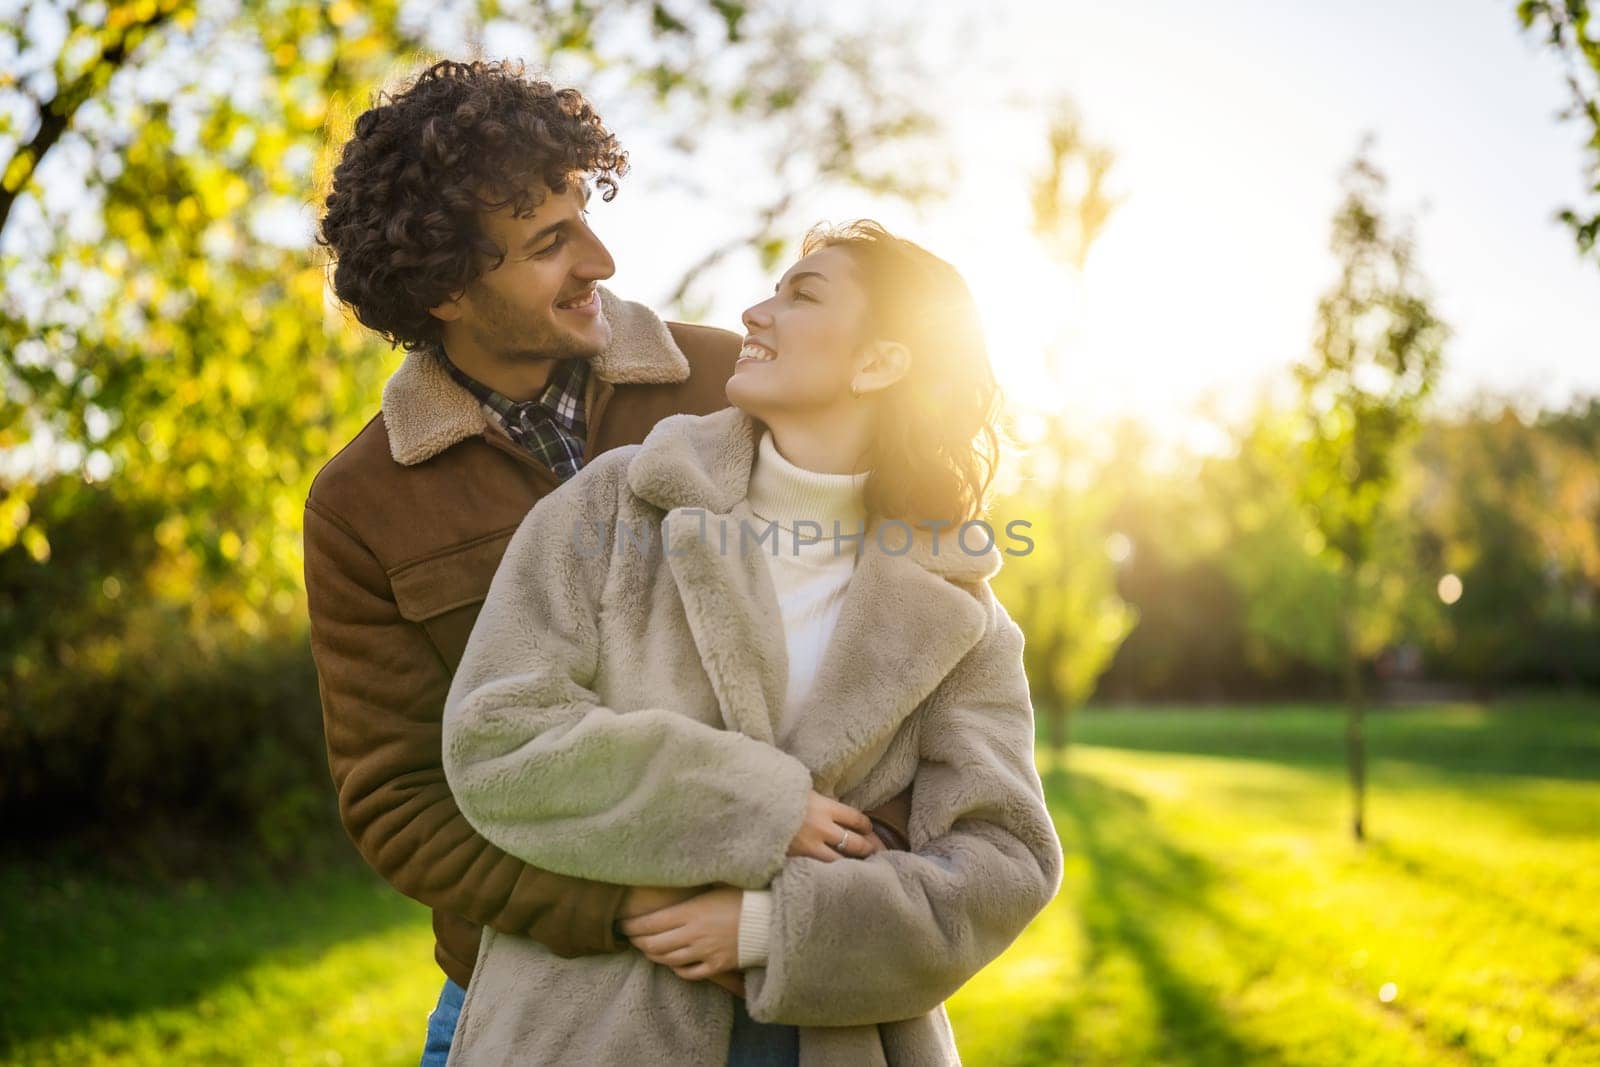 Happy loving couple embracing in park in sunset.